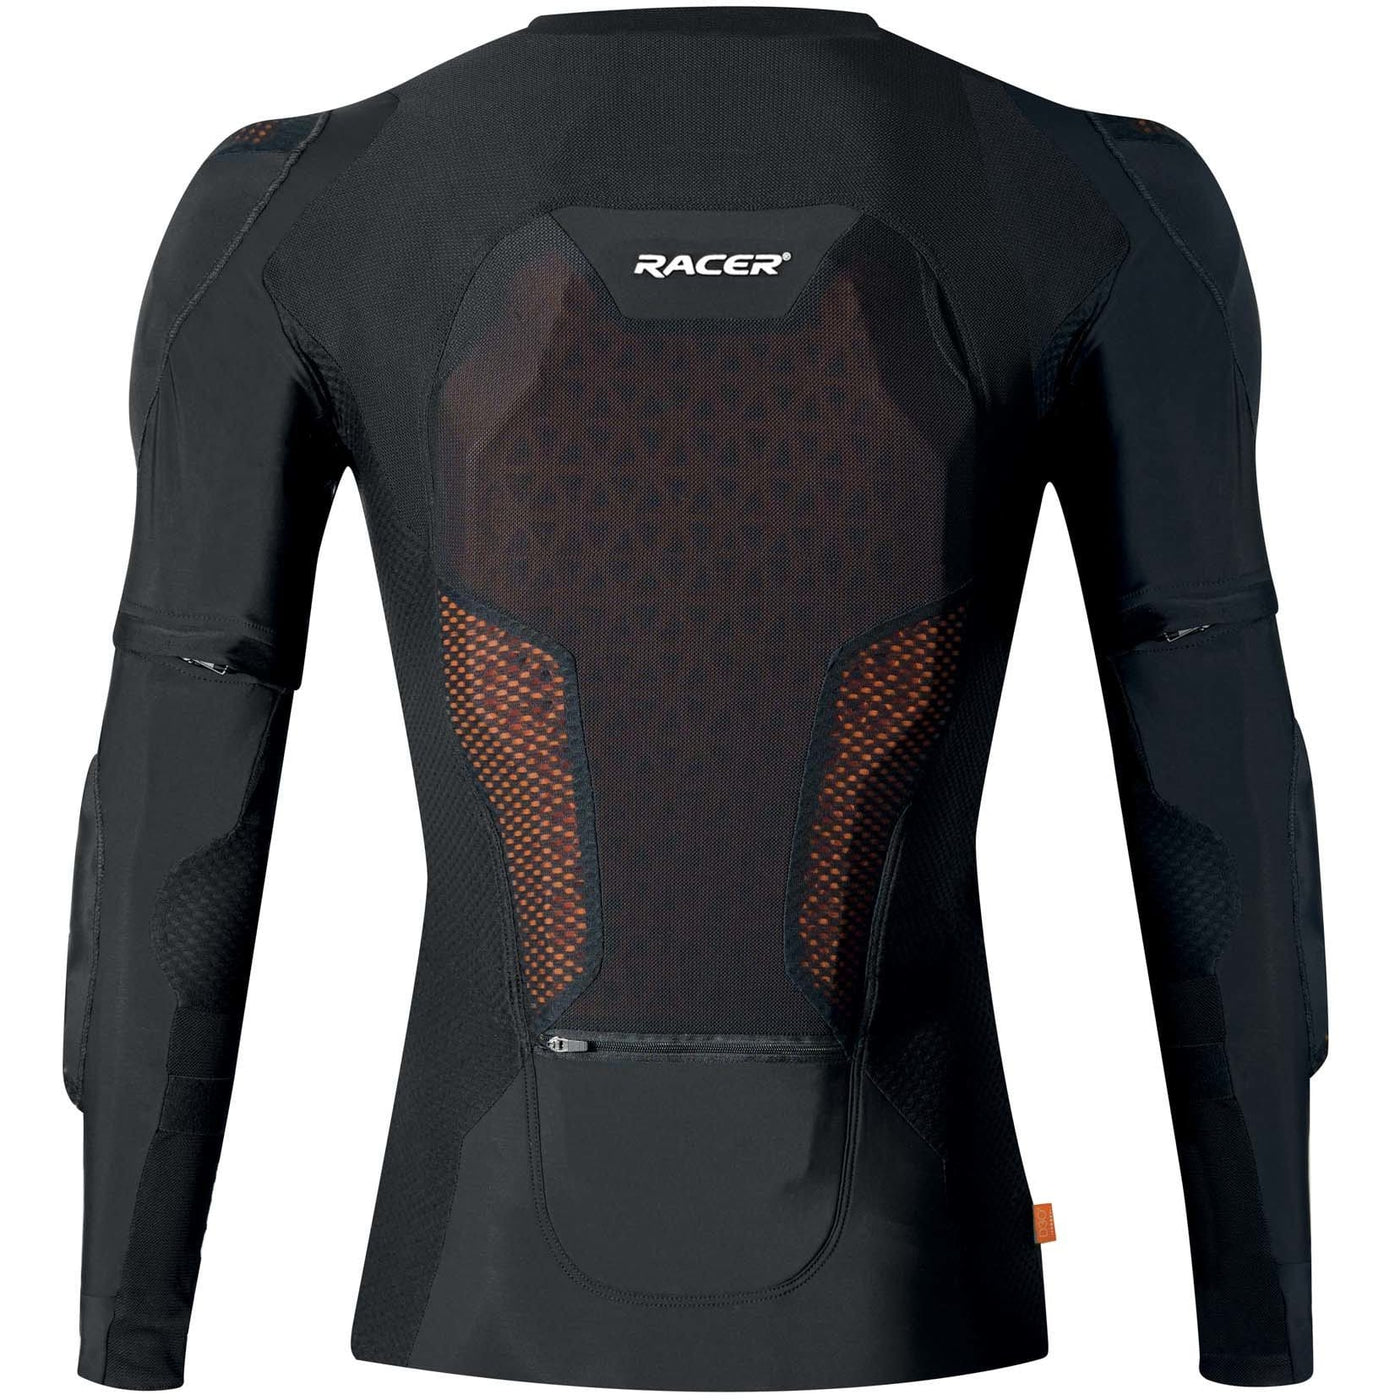 RACER France Motion Top 2 - Body Protector 8Lines Shop - Fast Shipping